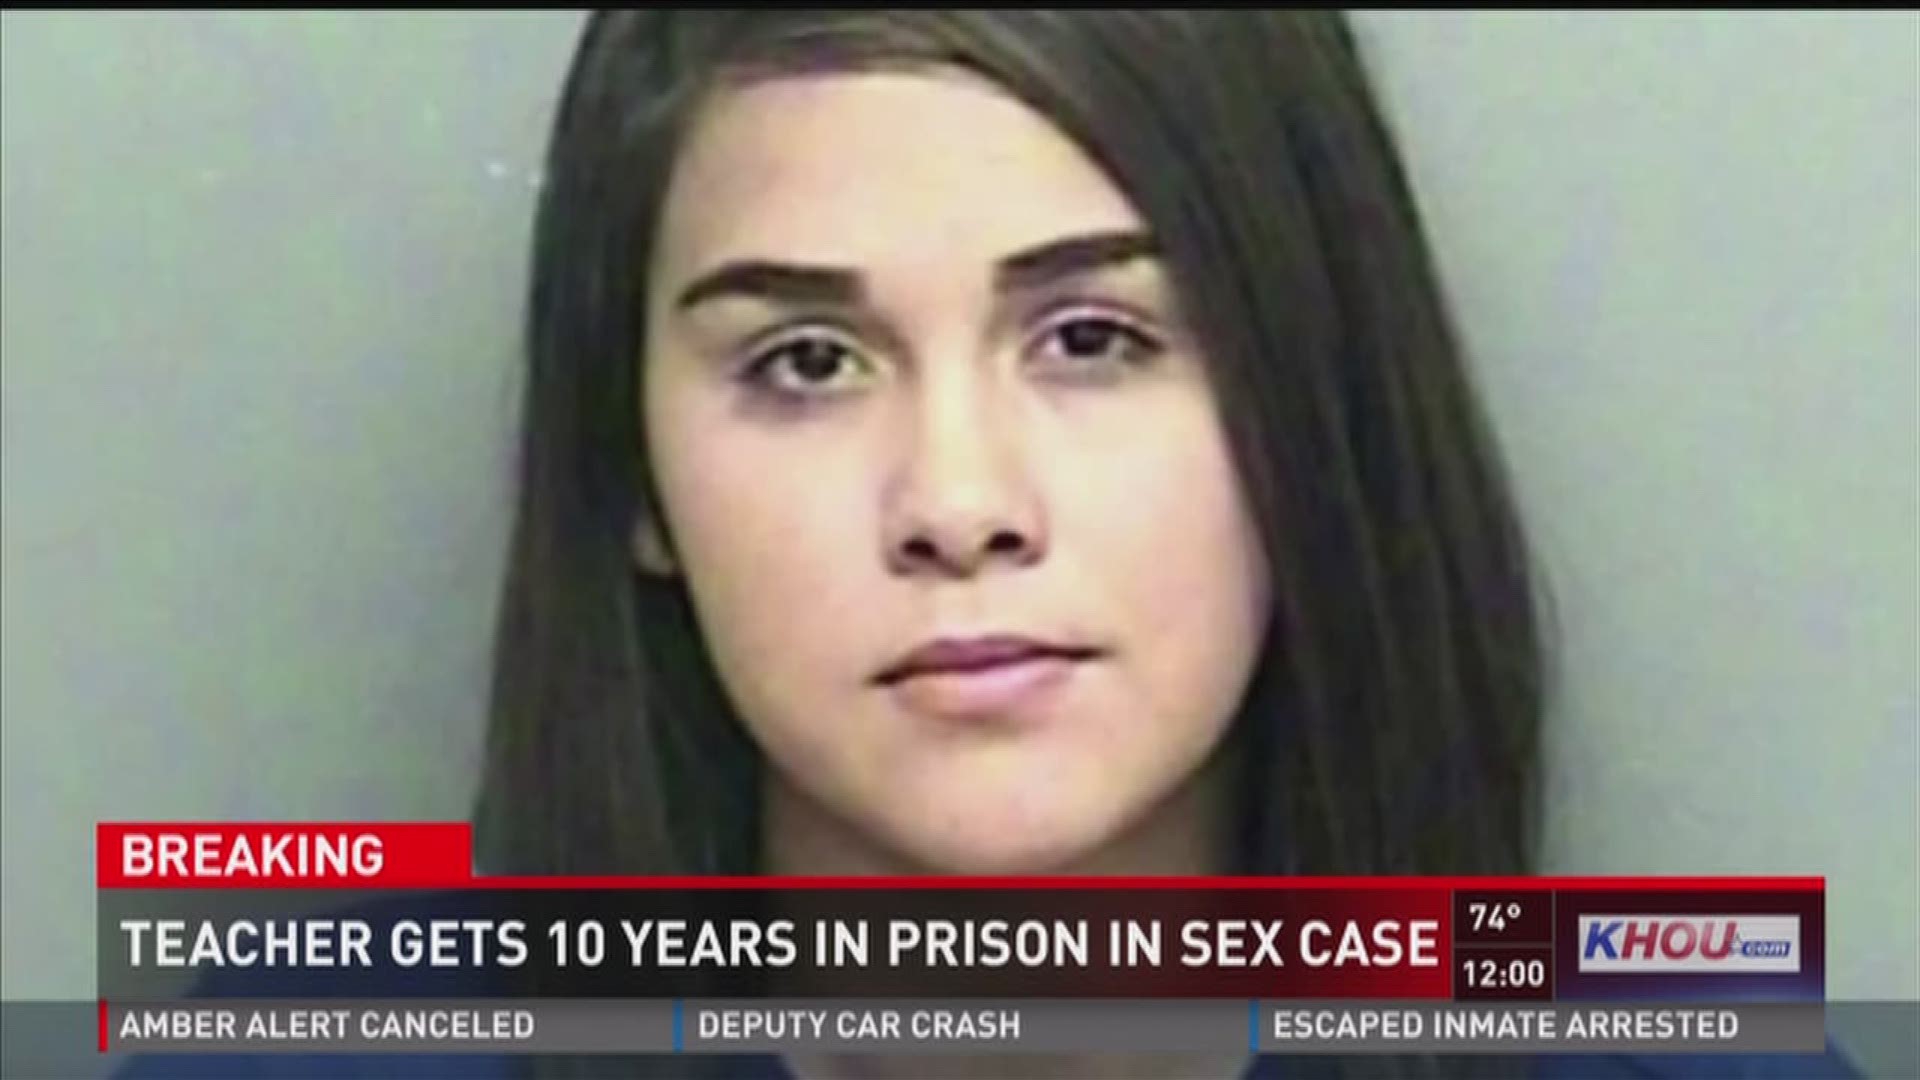 Ex Teacher Impregnated By 13 Year Old Student Sentenced To 10 Years